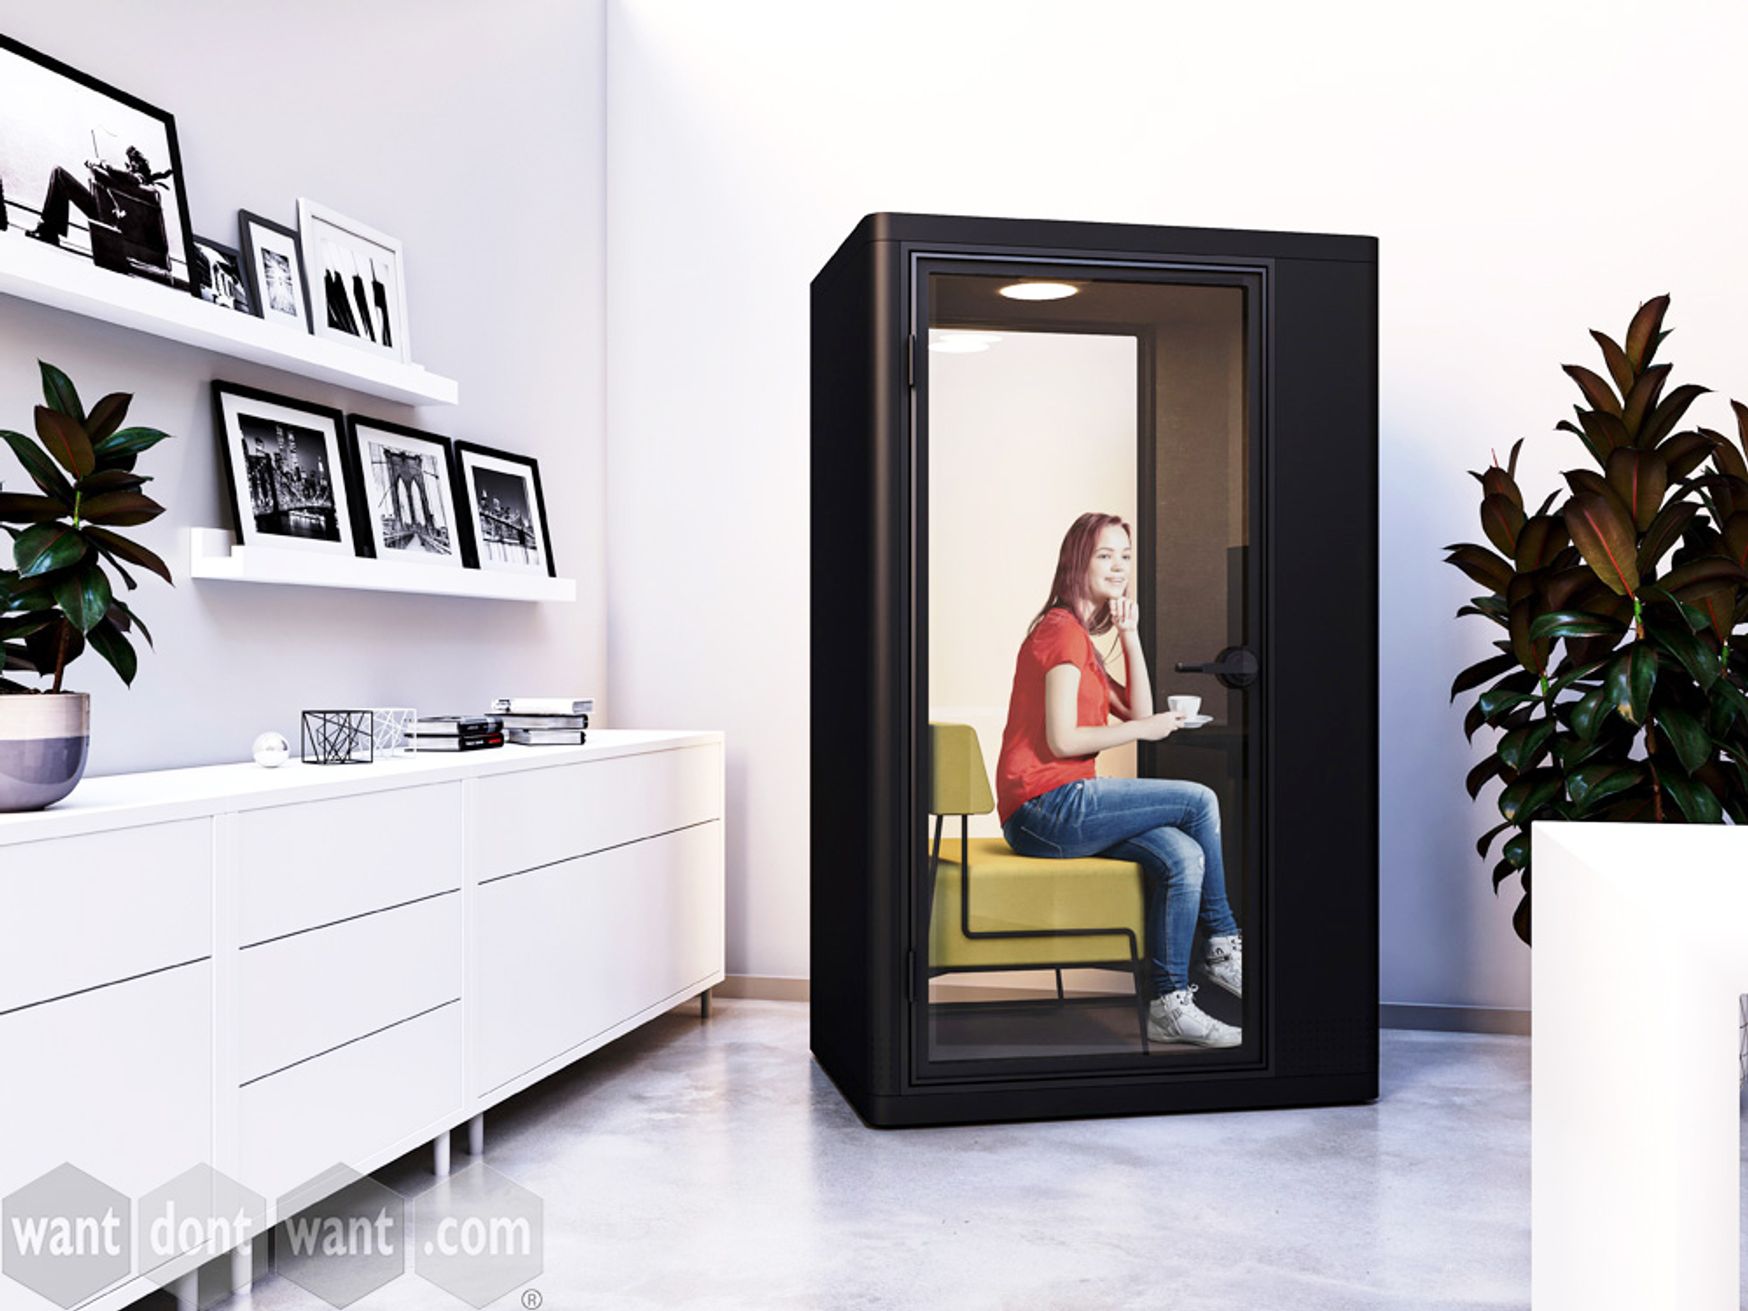 <b>IN STOCK NOW!</b> Brand new excellent design phone/work booths.